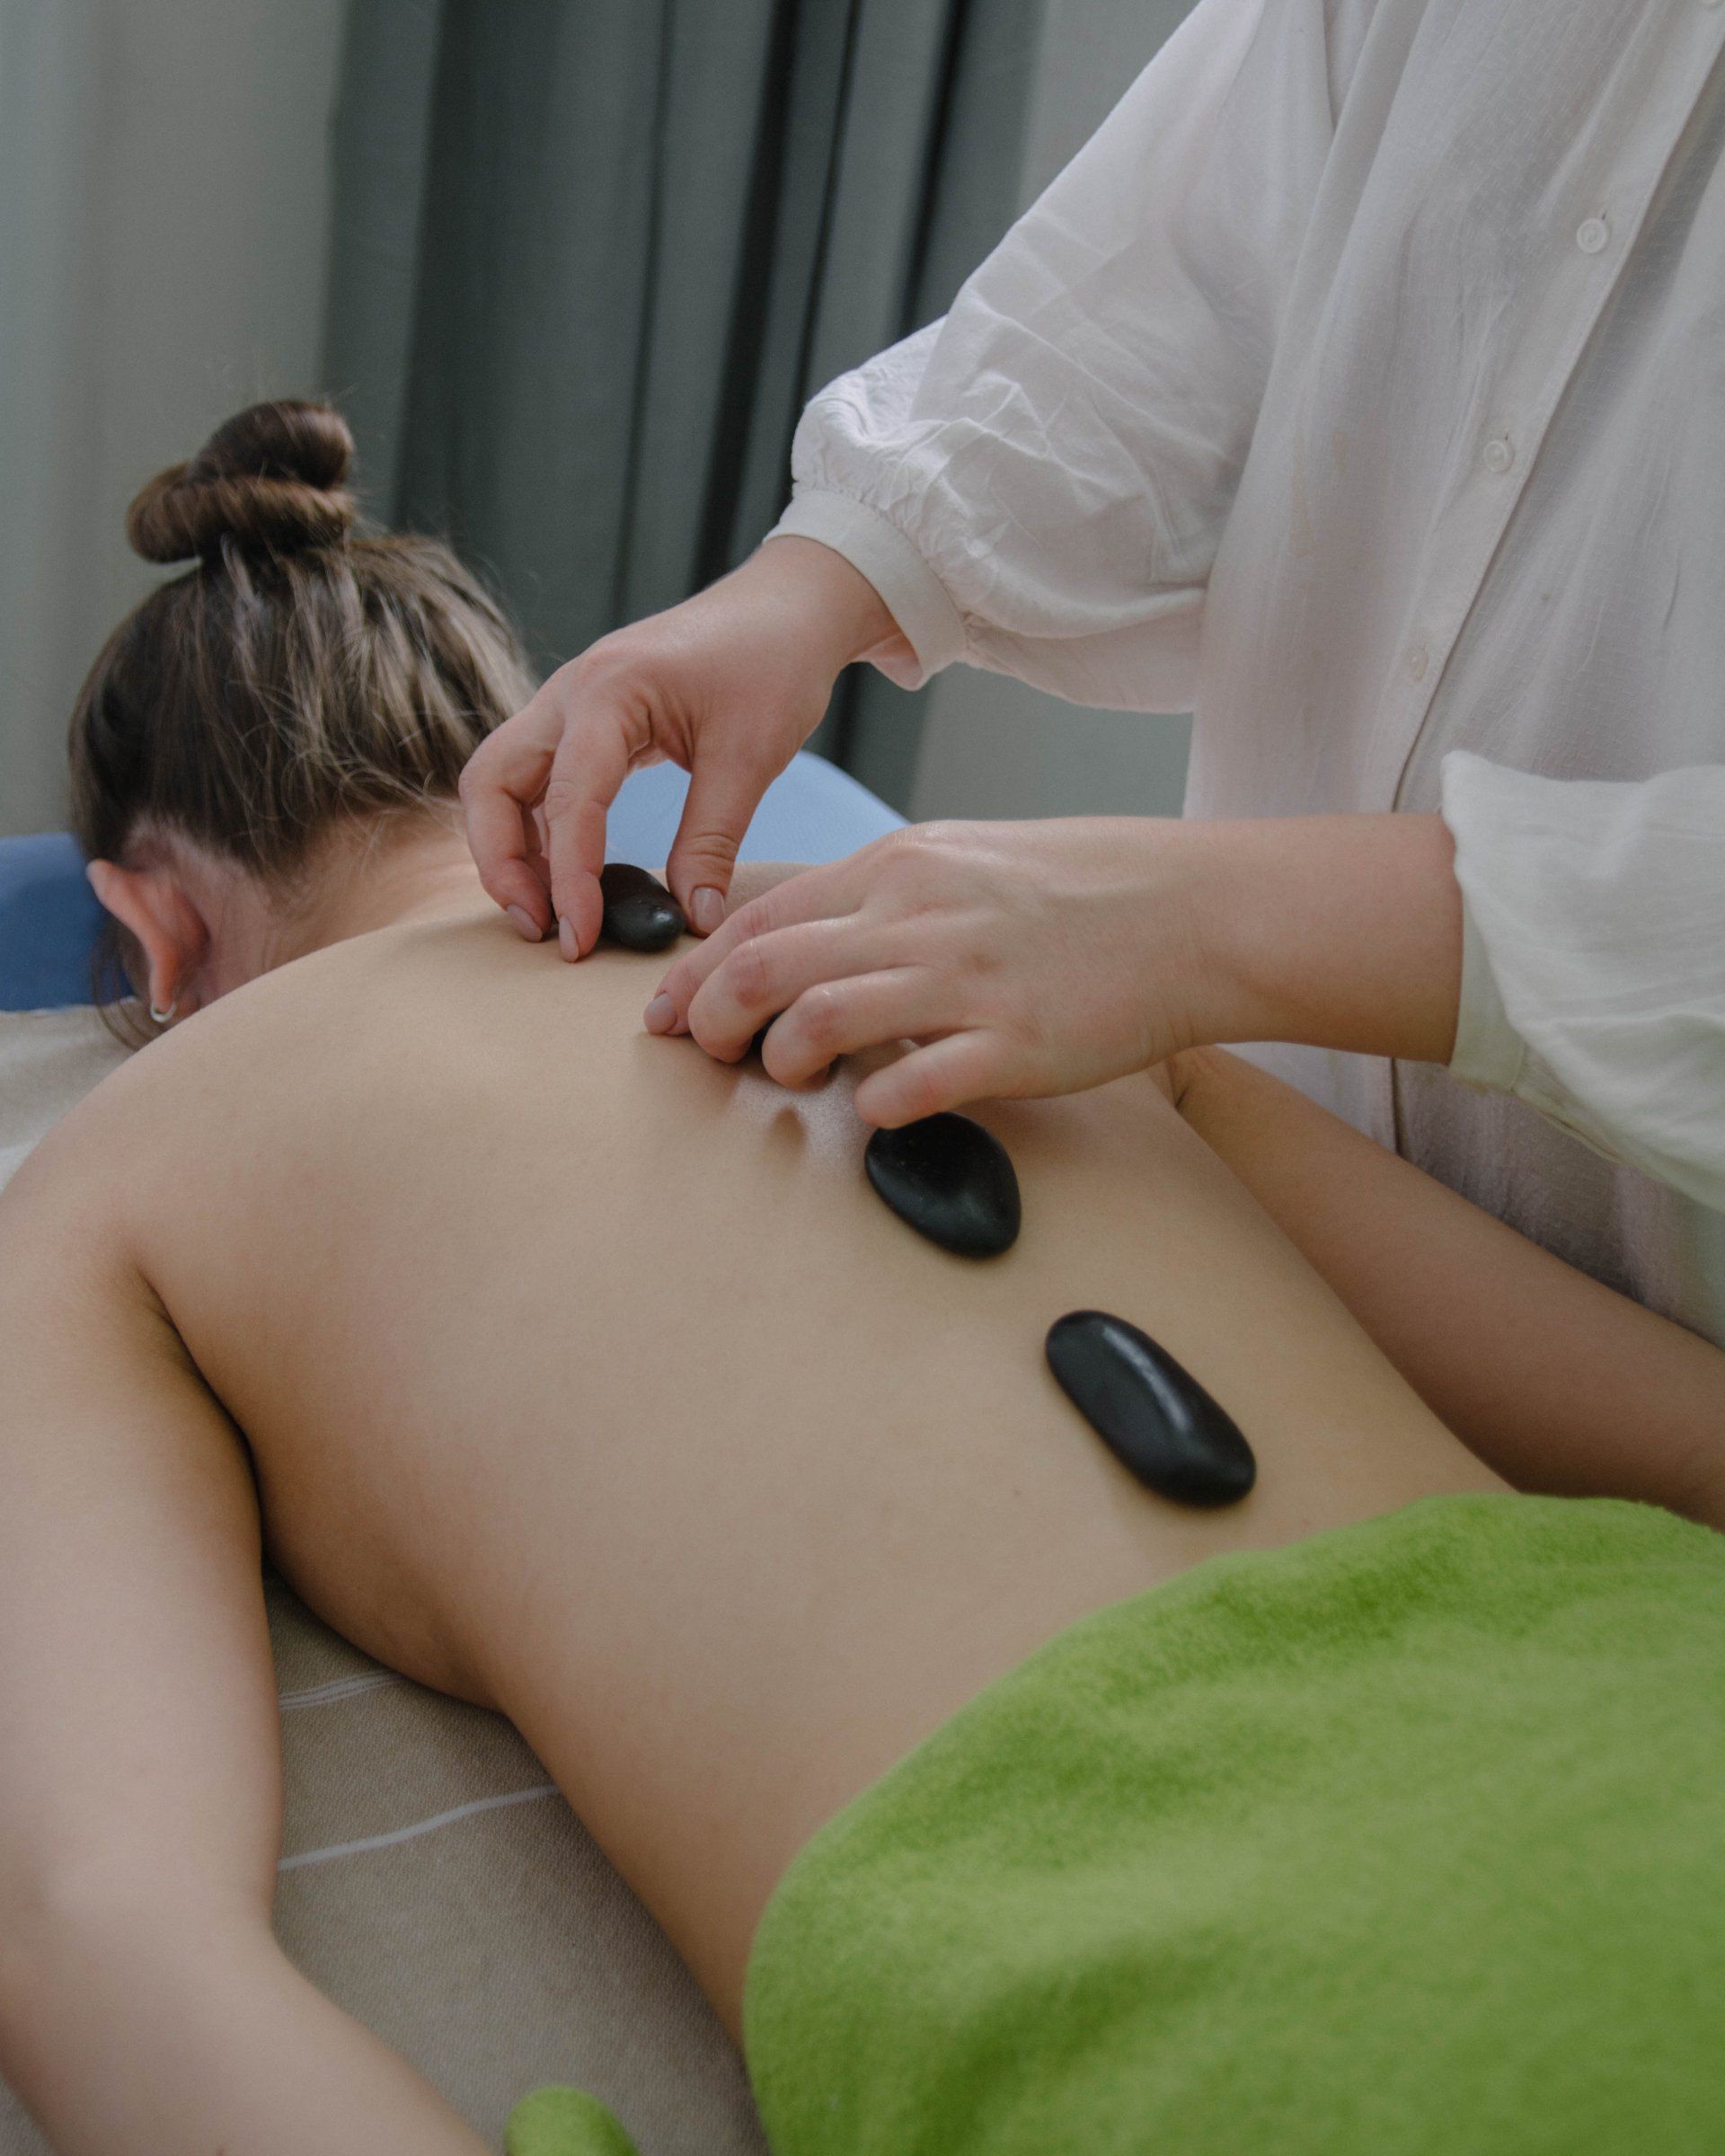 a woman is getting a hot stone therapy with rocks on her back